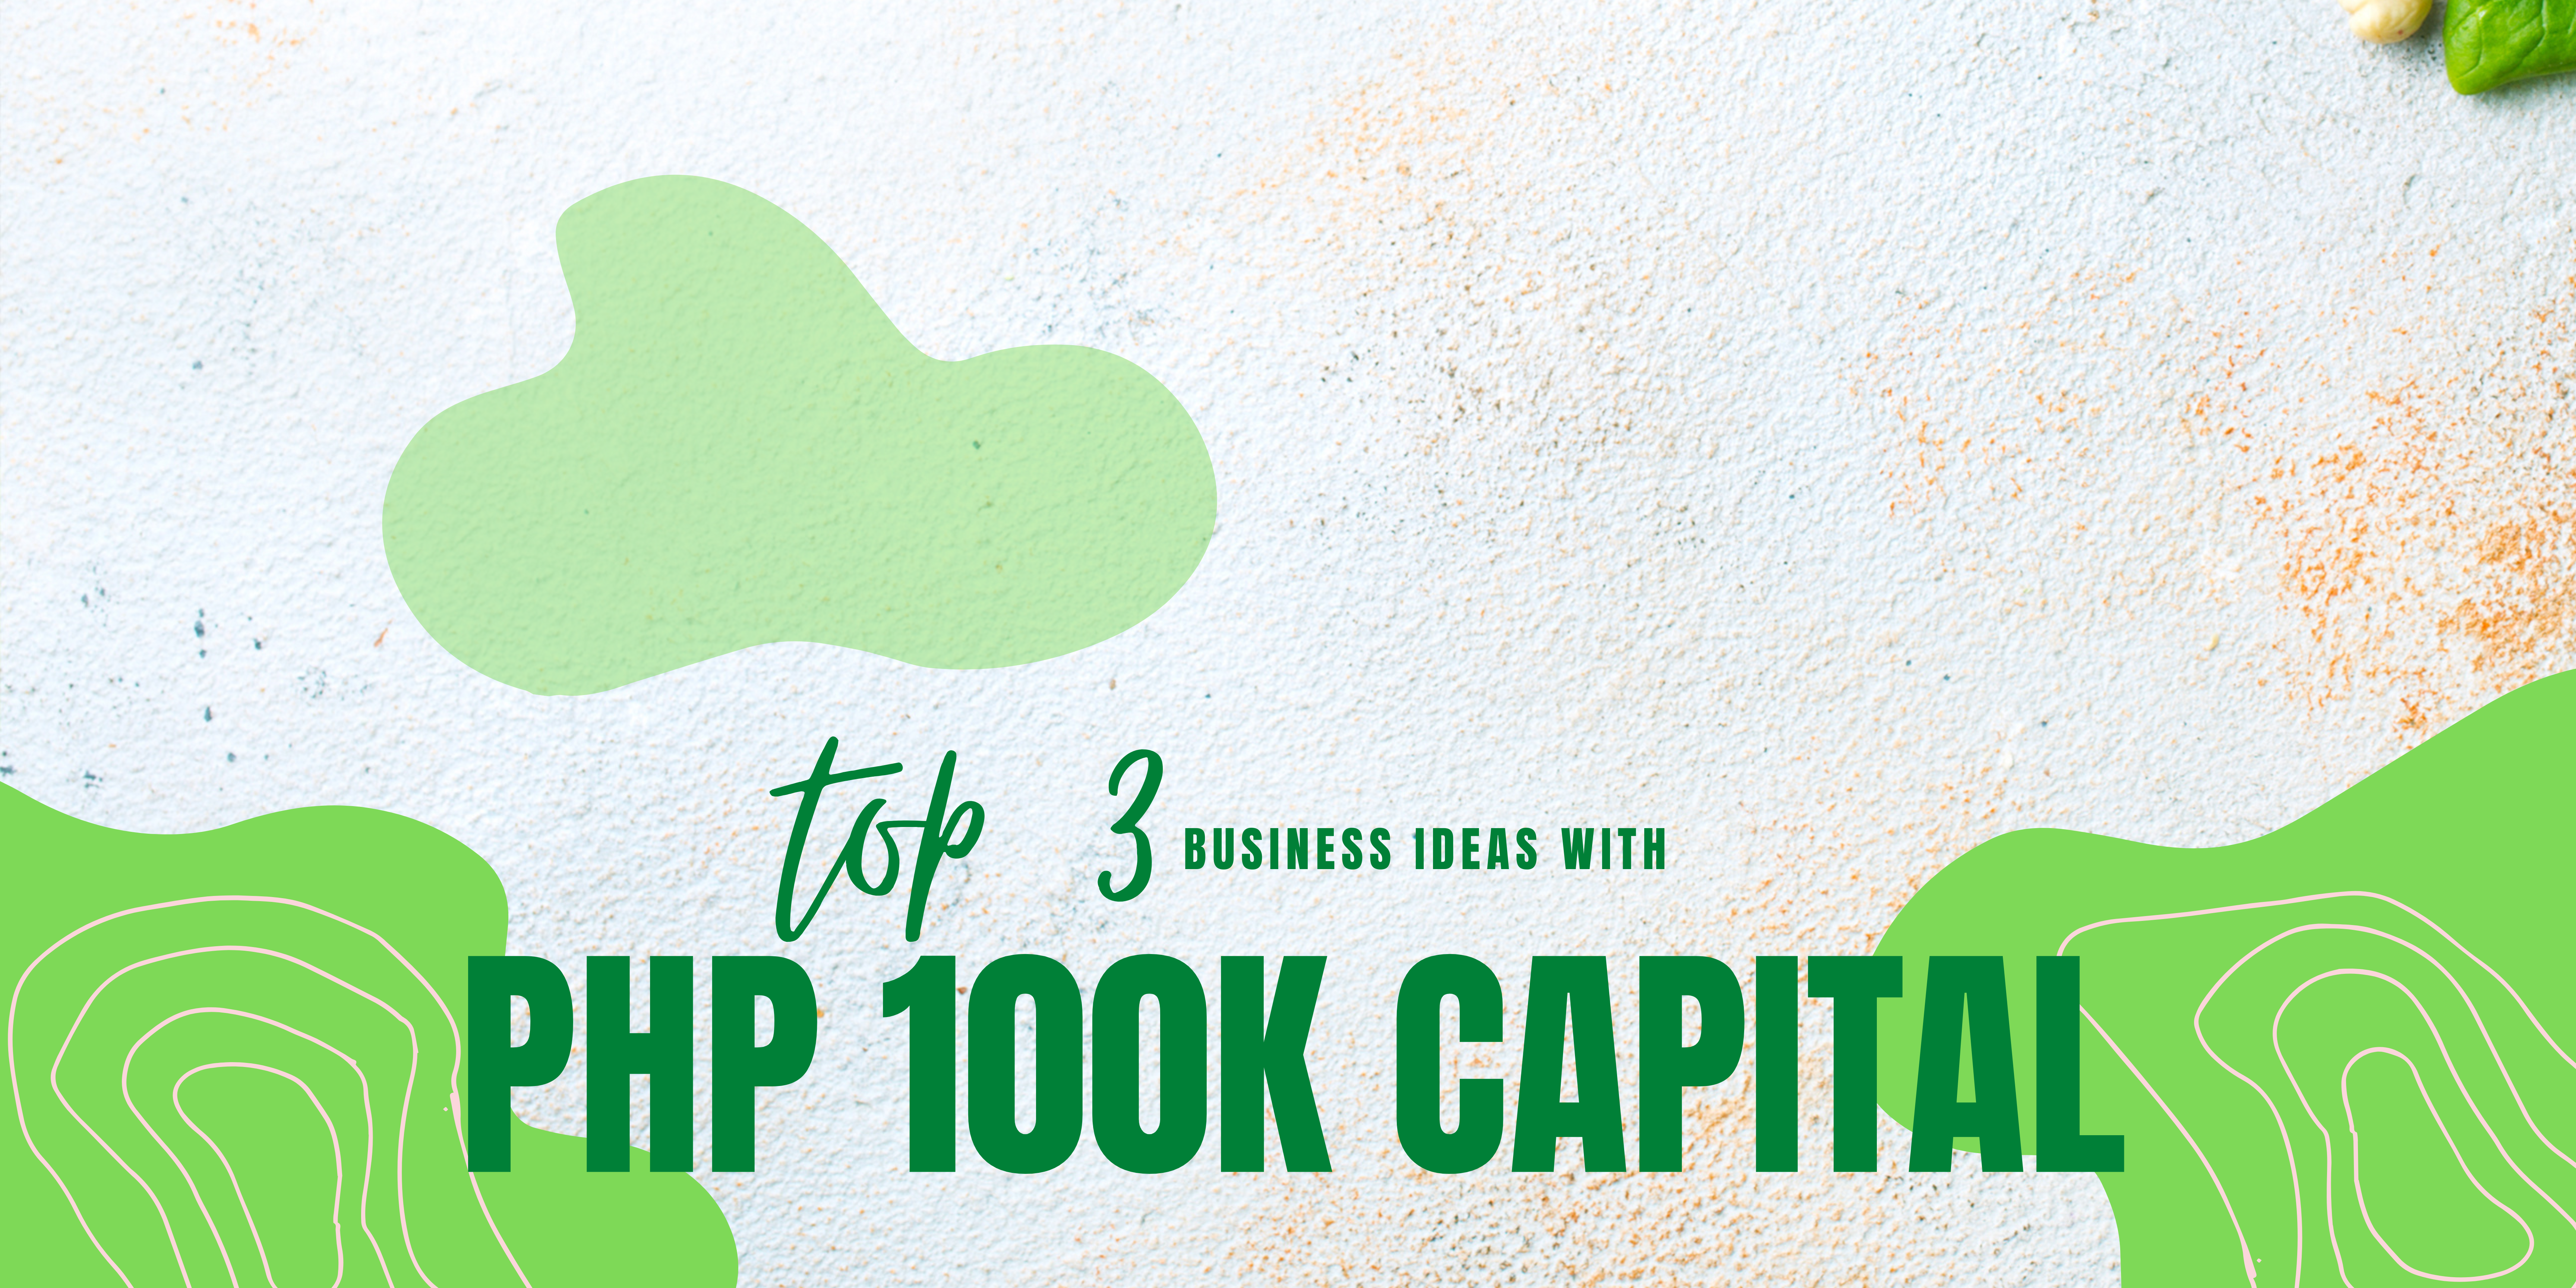 Top 3 Business Ideas with Php 100,000 Capital Banner -diarynigracia